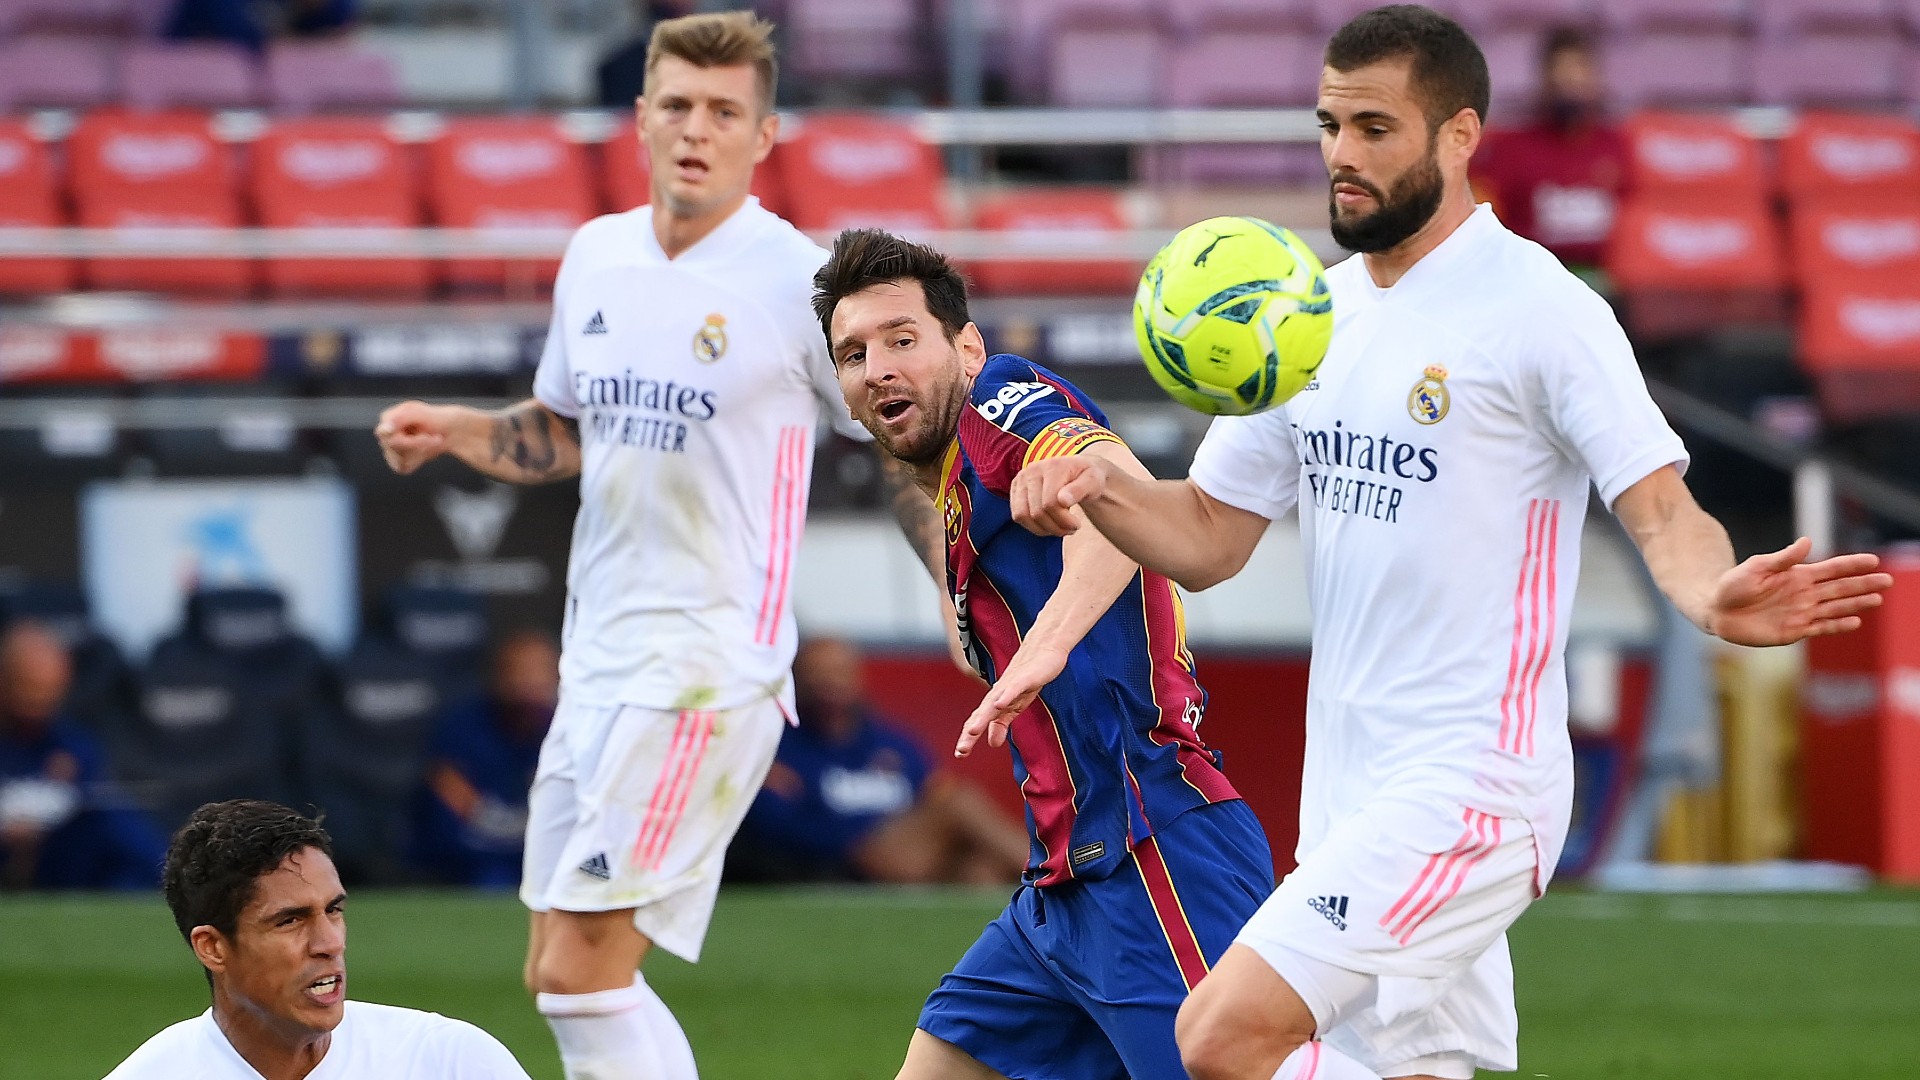 How to watch the El Clasico and other La Liga matches in India: TV, live stream, fixtures & teams